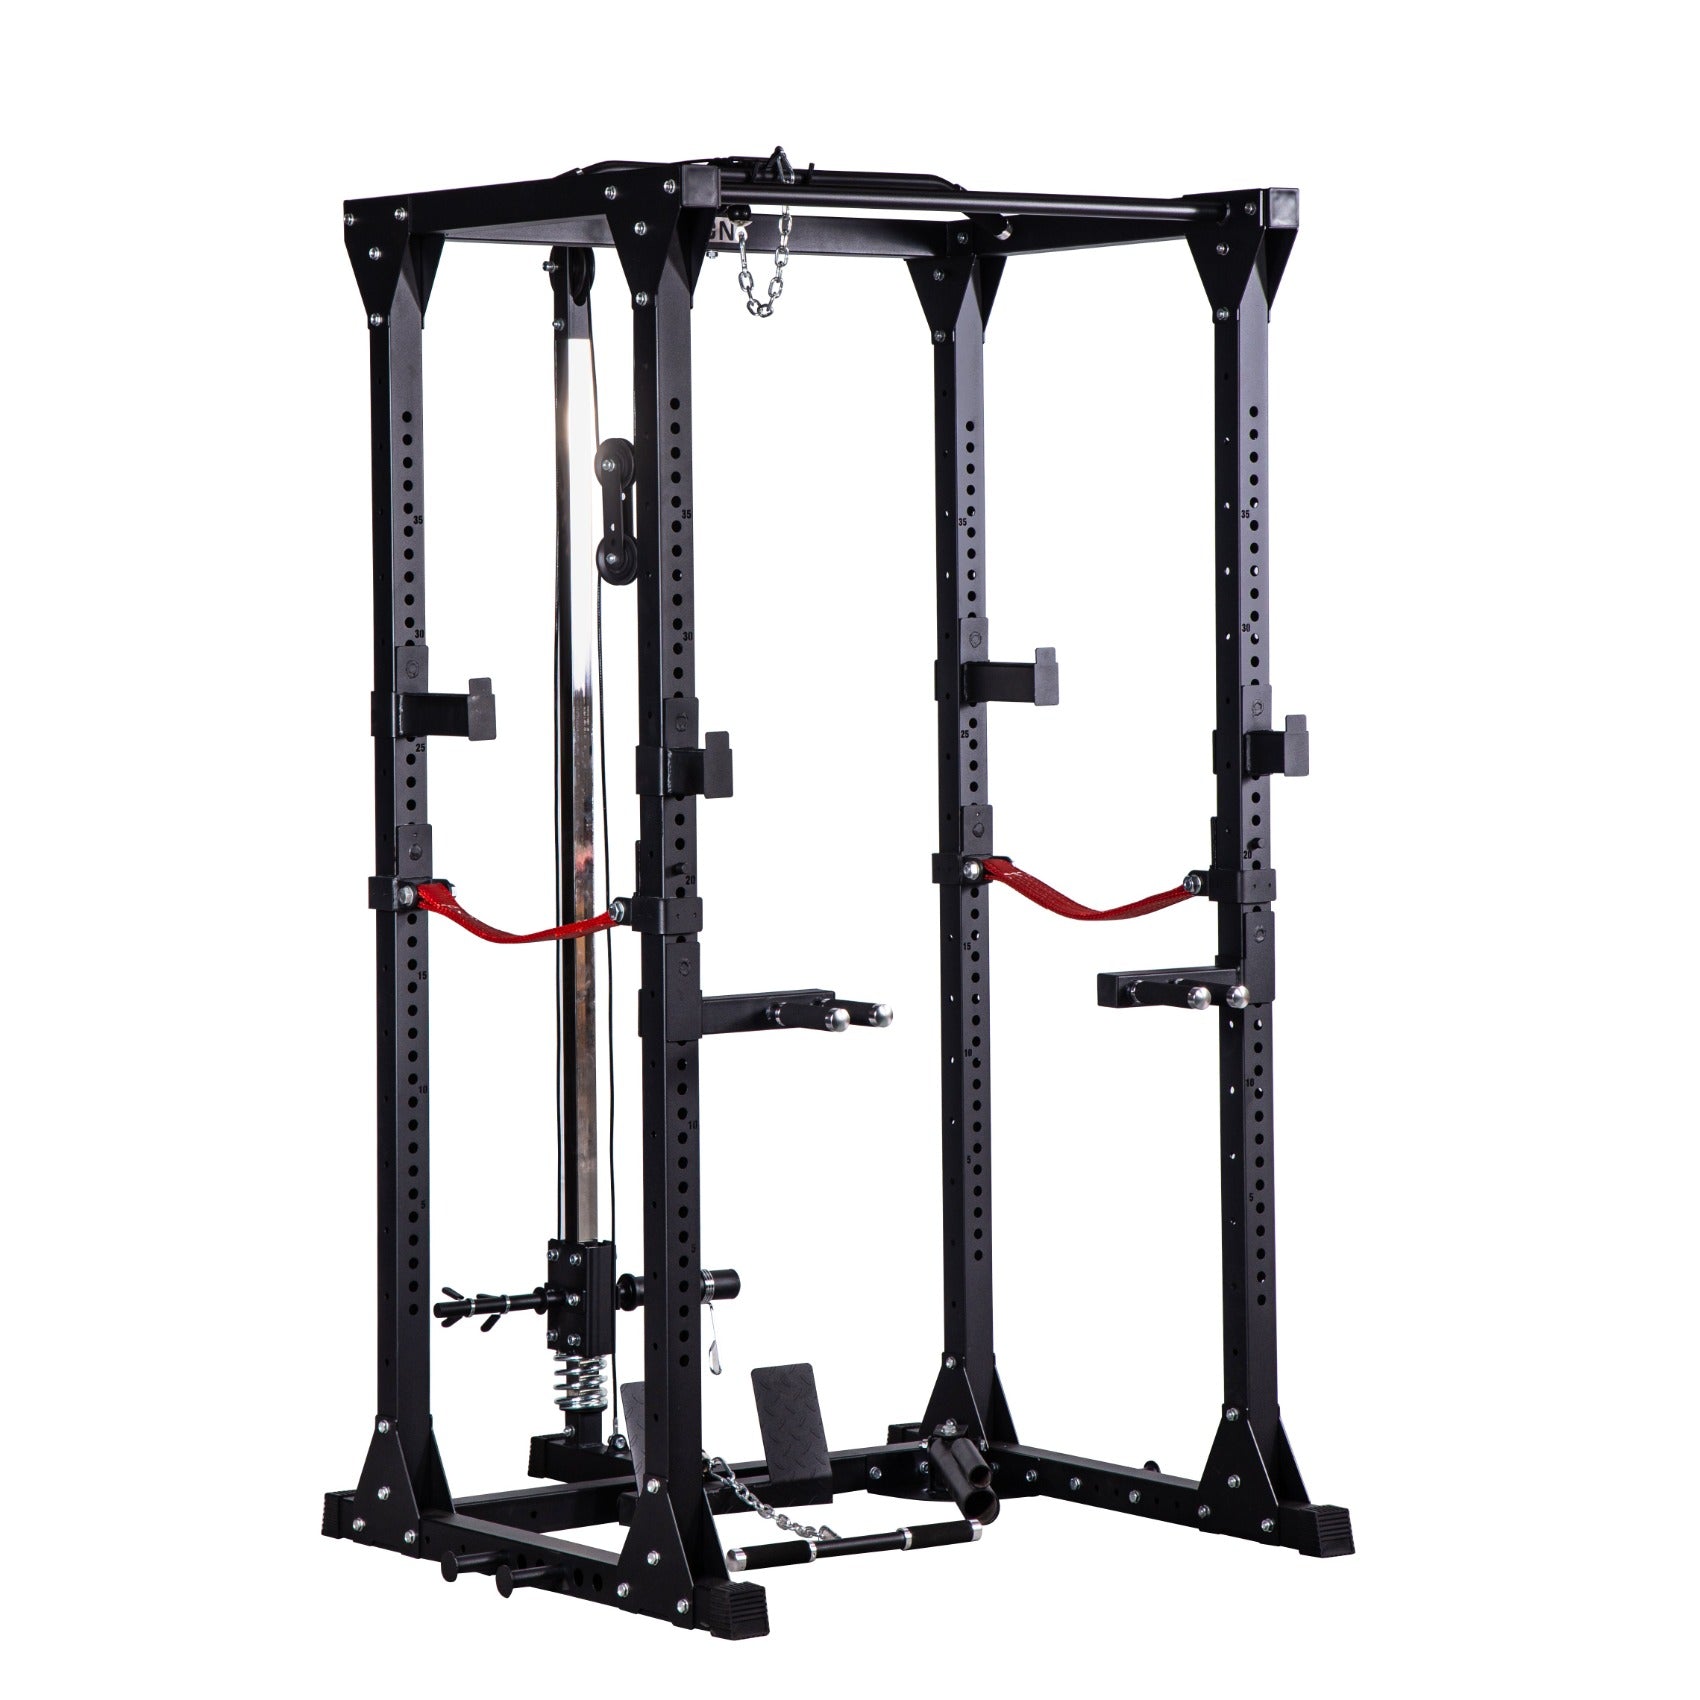 Exercise & Fitness, Gym Equipment Sale Canada